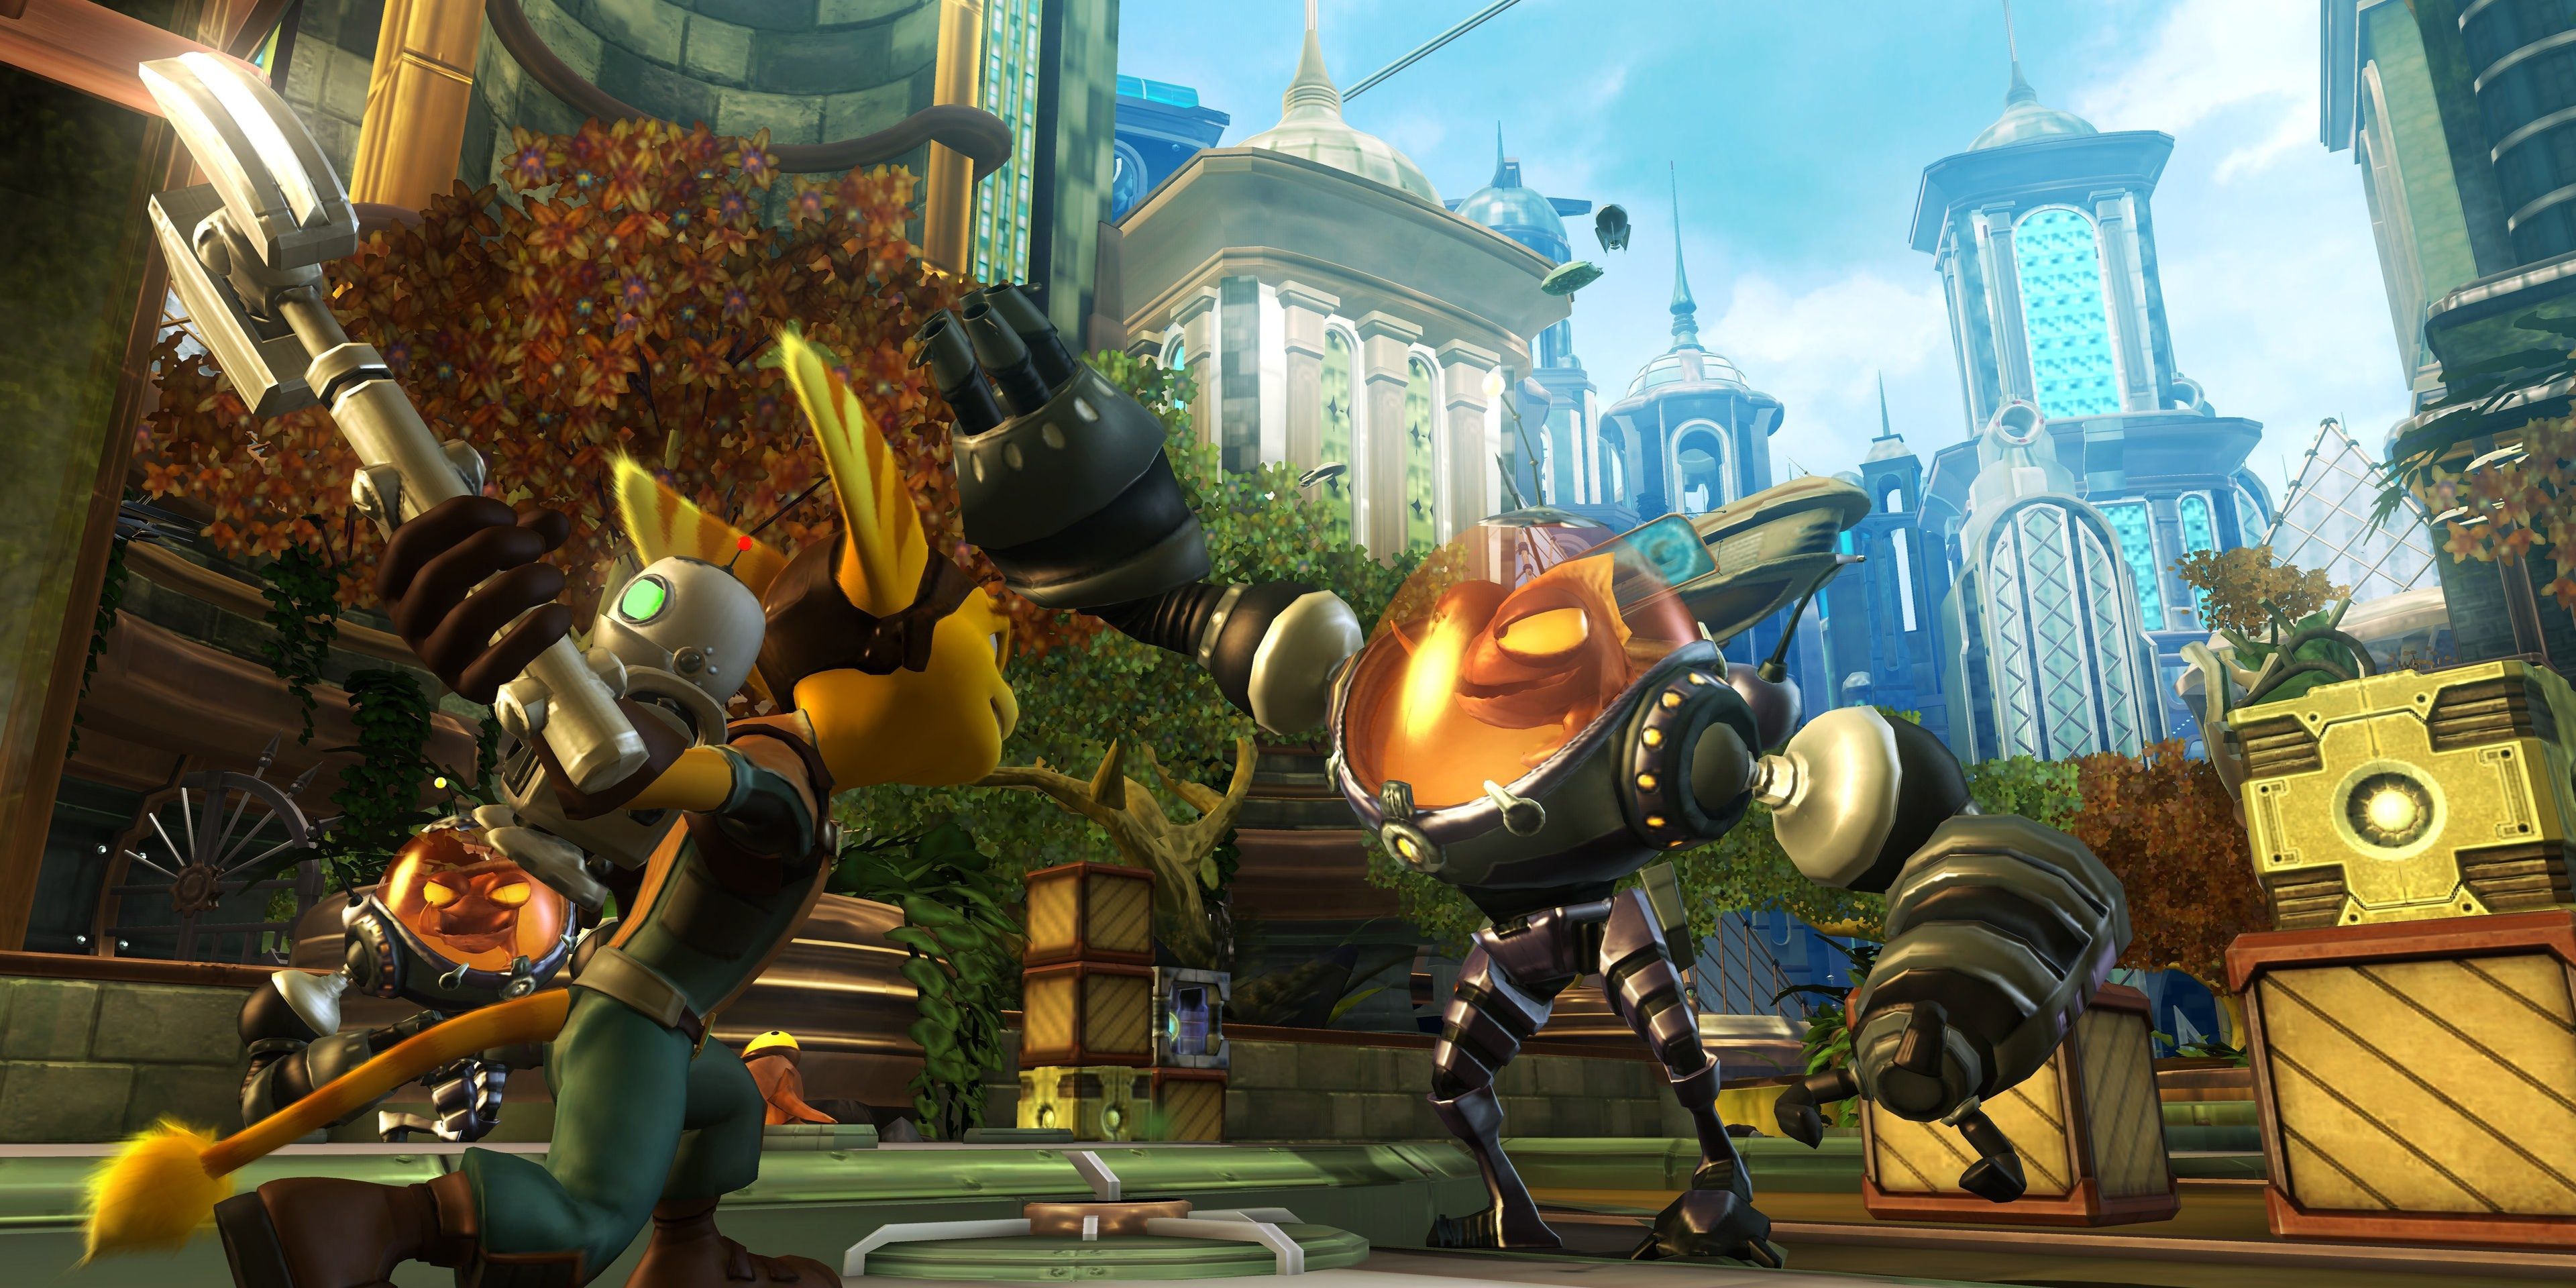 Ratchet and Clank prepare to attack a large enemy in a city